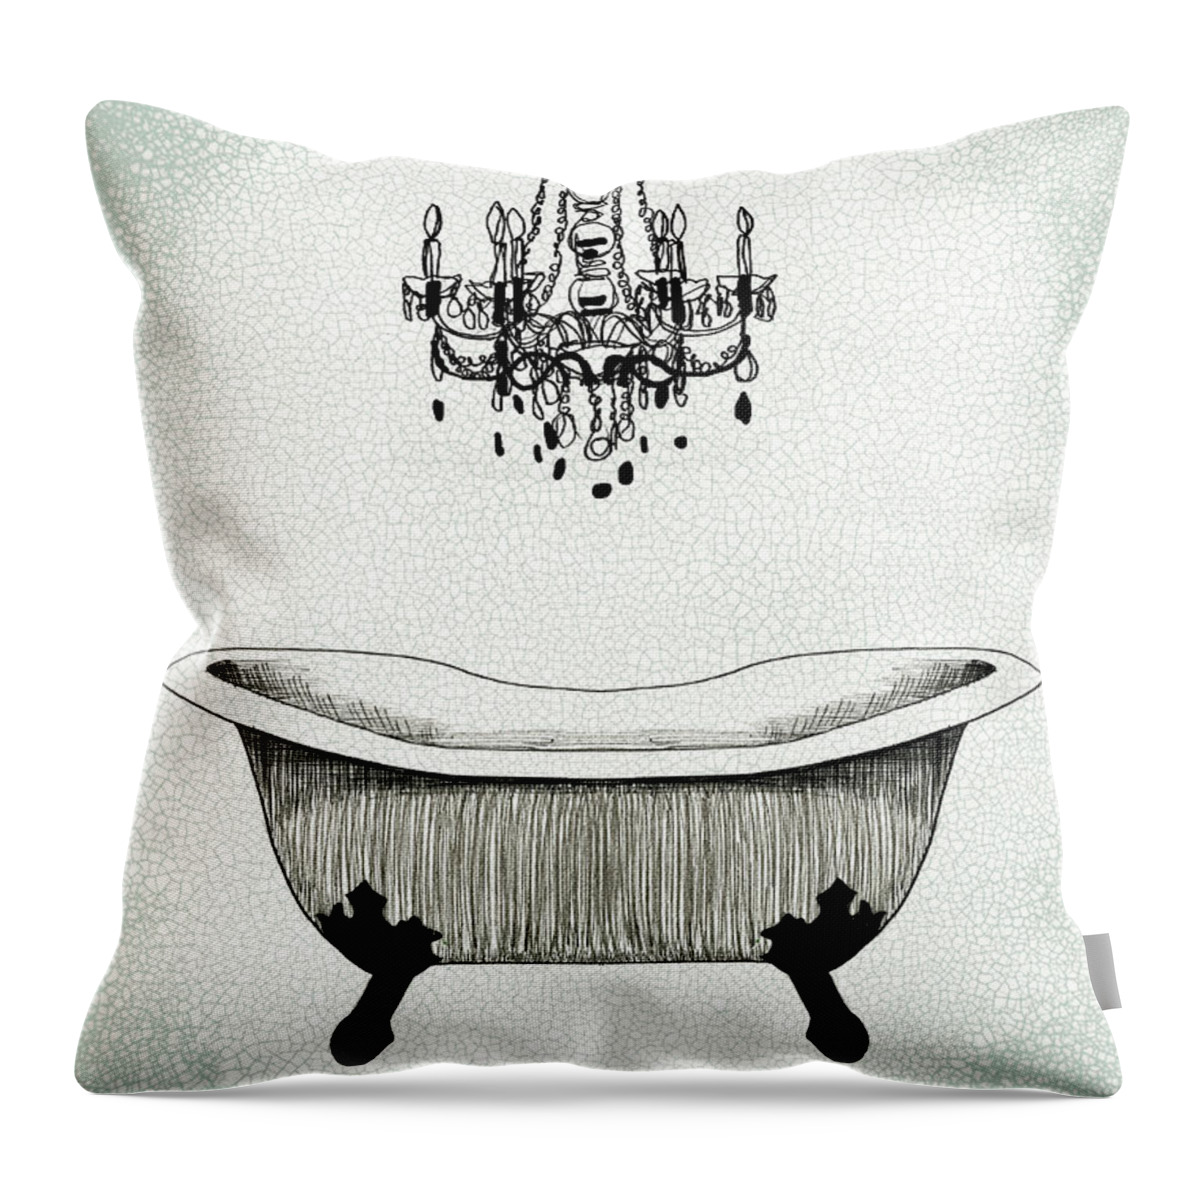 Embellished Throw Pillow featuring the painting Gilded Bath II by Grace Popp